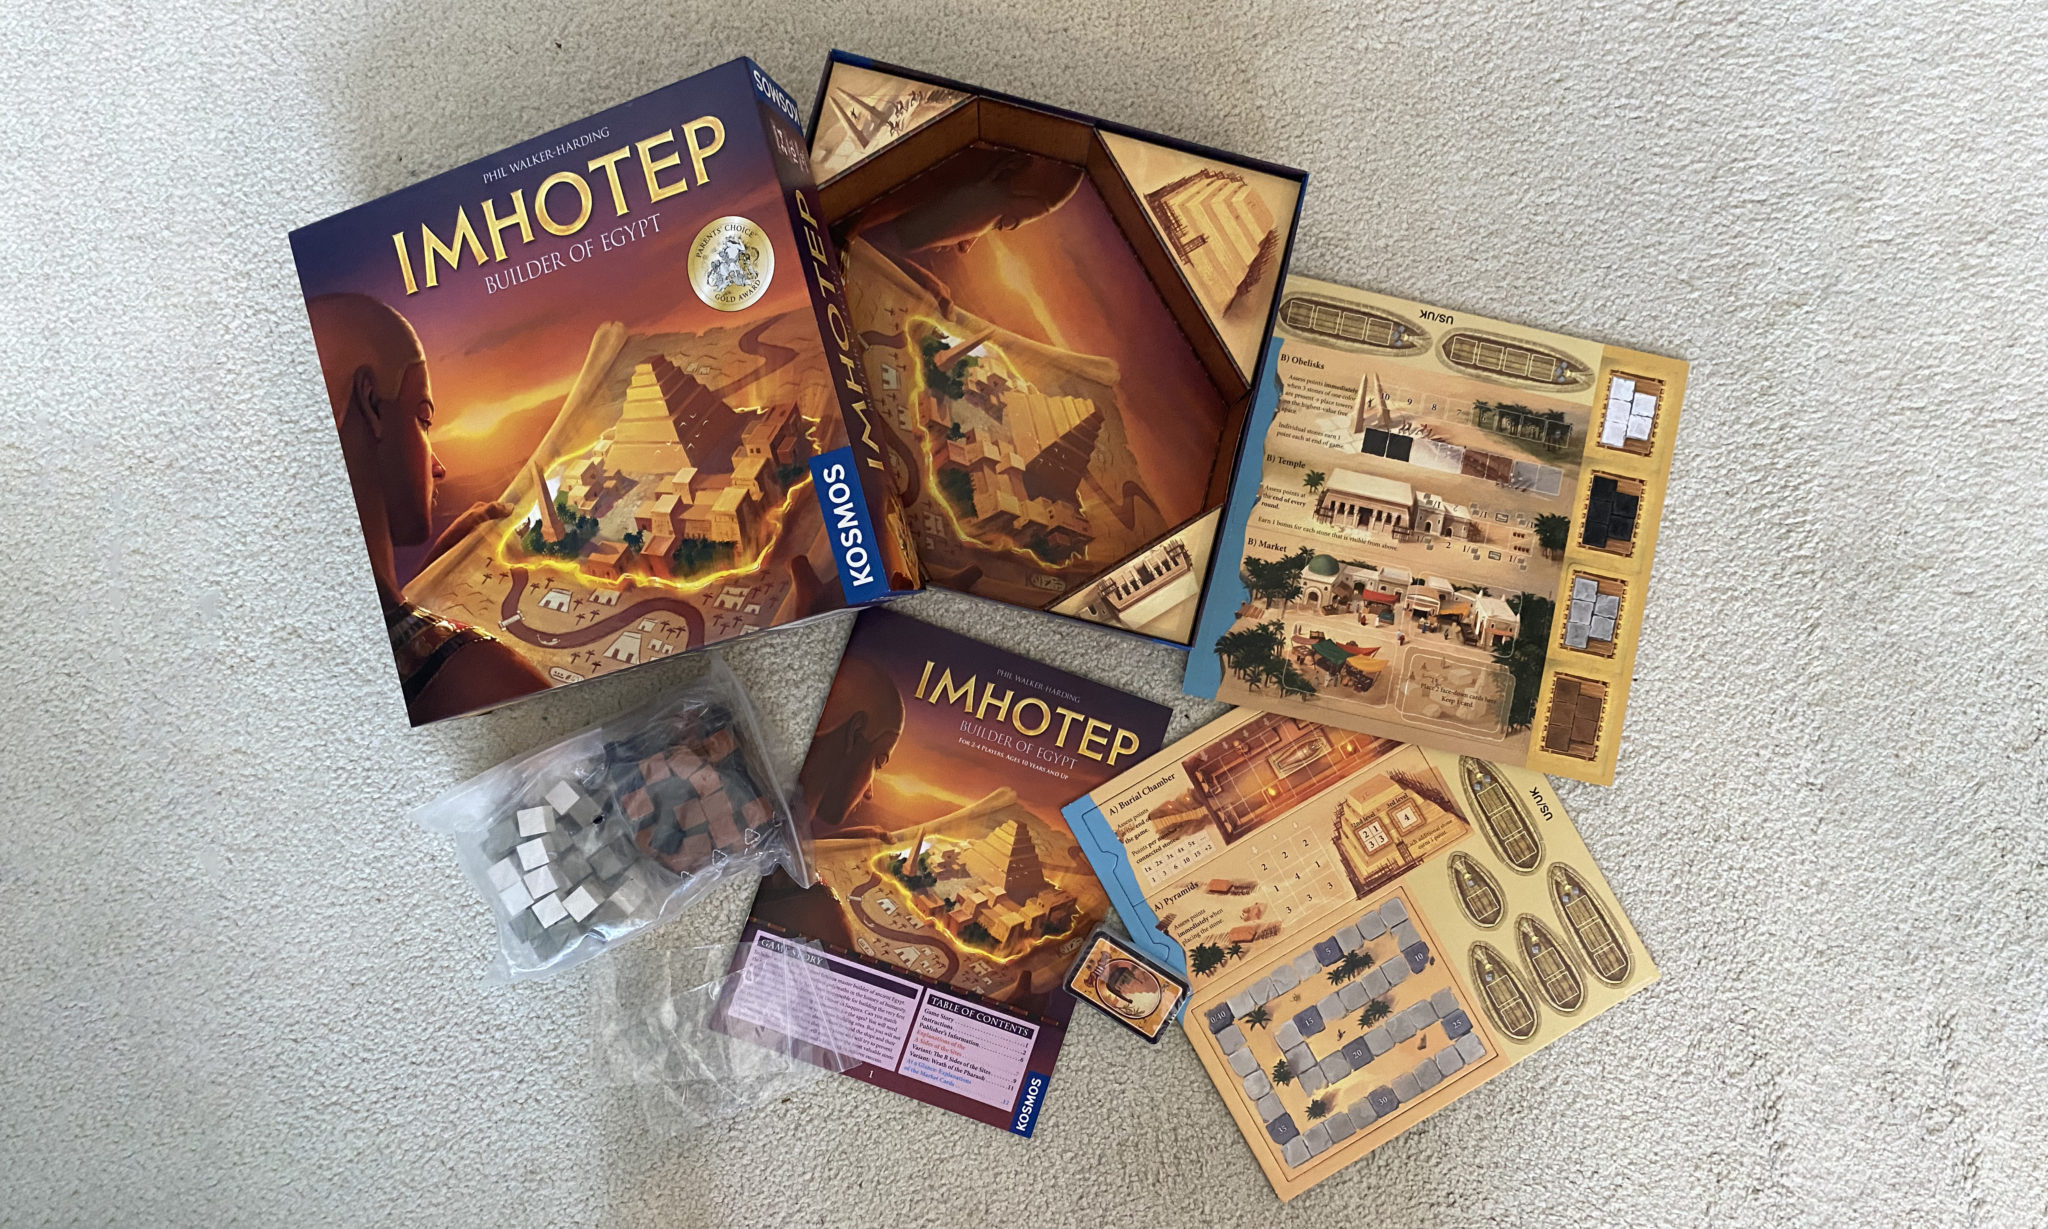 Contents of Imhotep